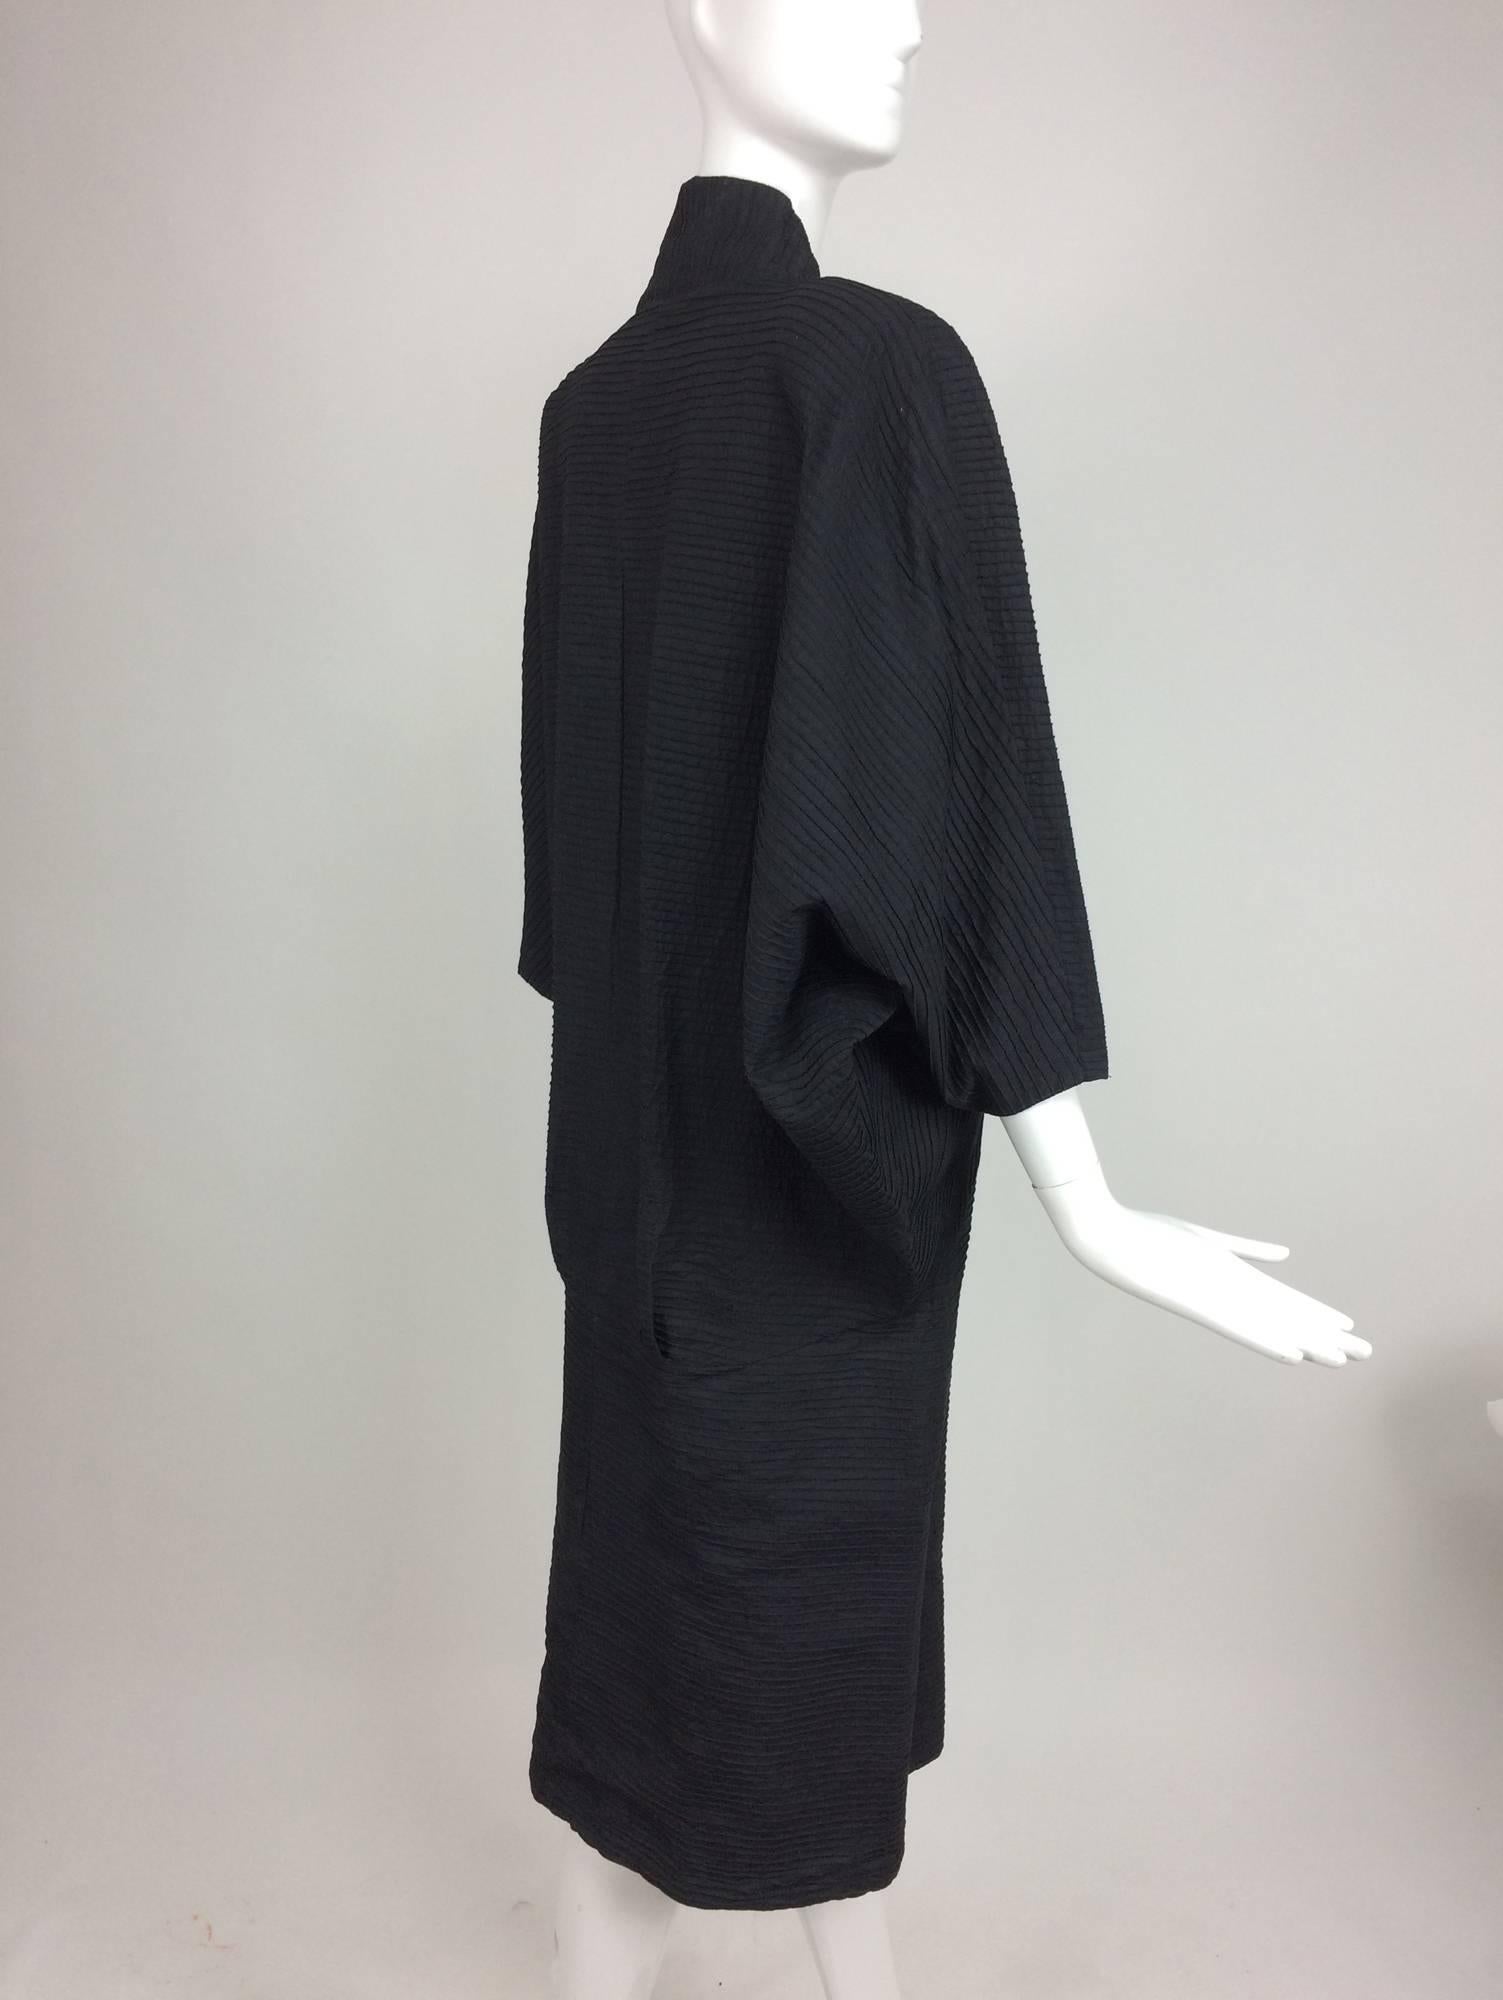 Twins Armoire Boutique Black pin tucked cotton bat wing coat 1980s 4